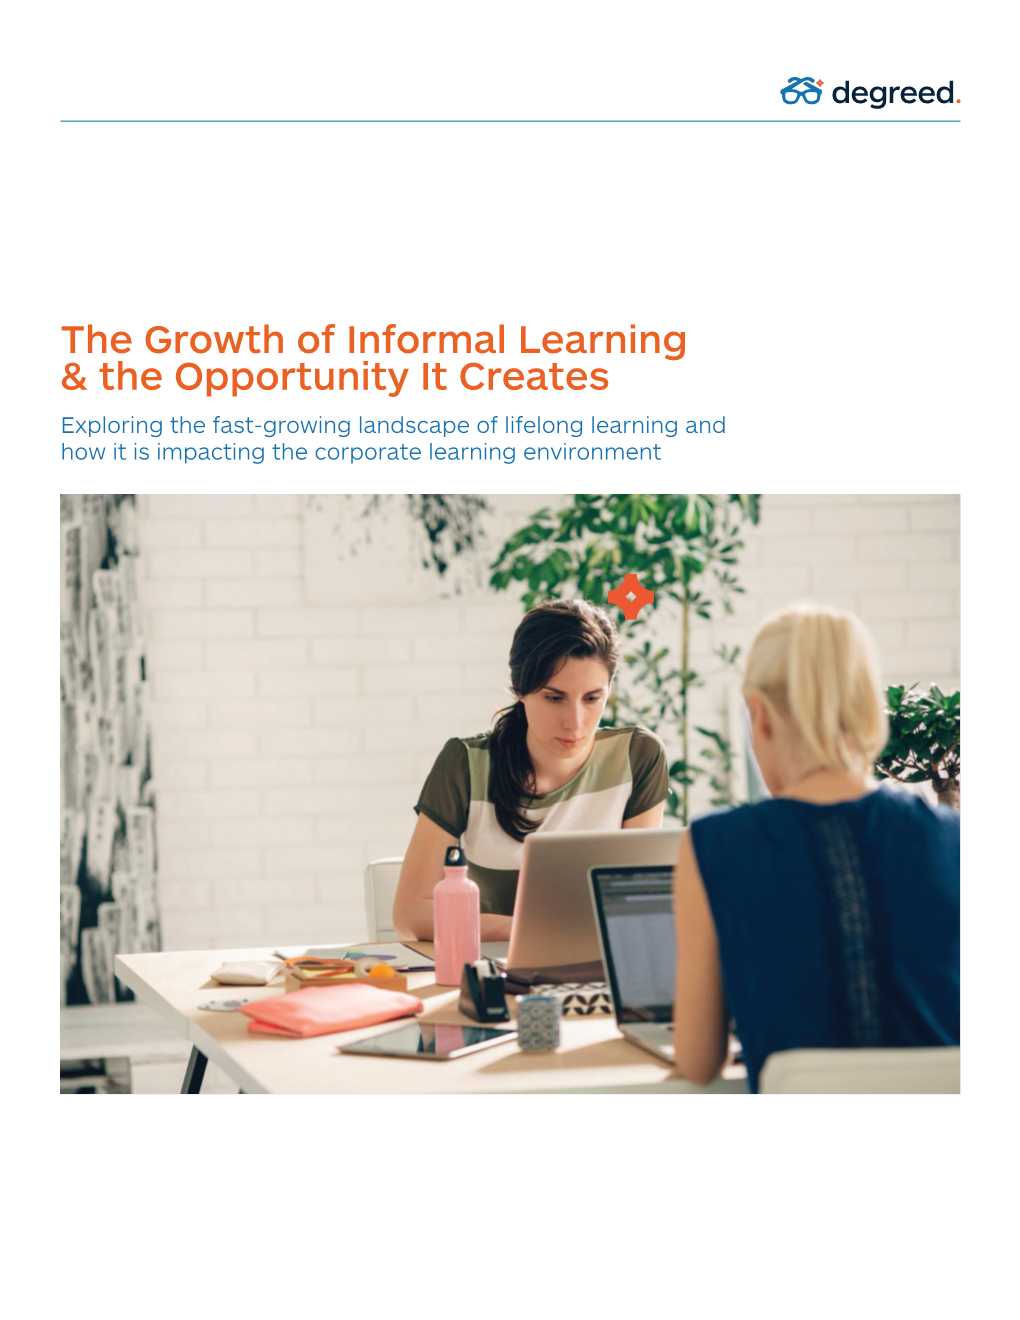 The Growth of Informal Learning & the Opportunity It Creates